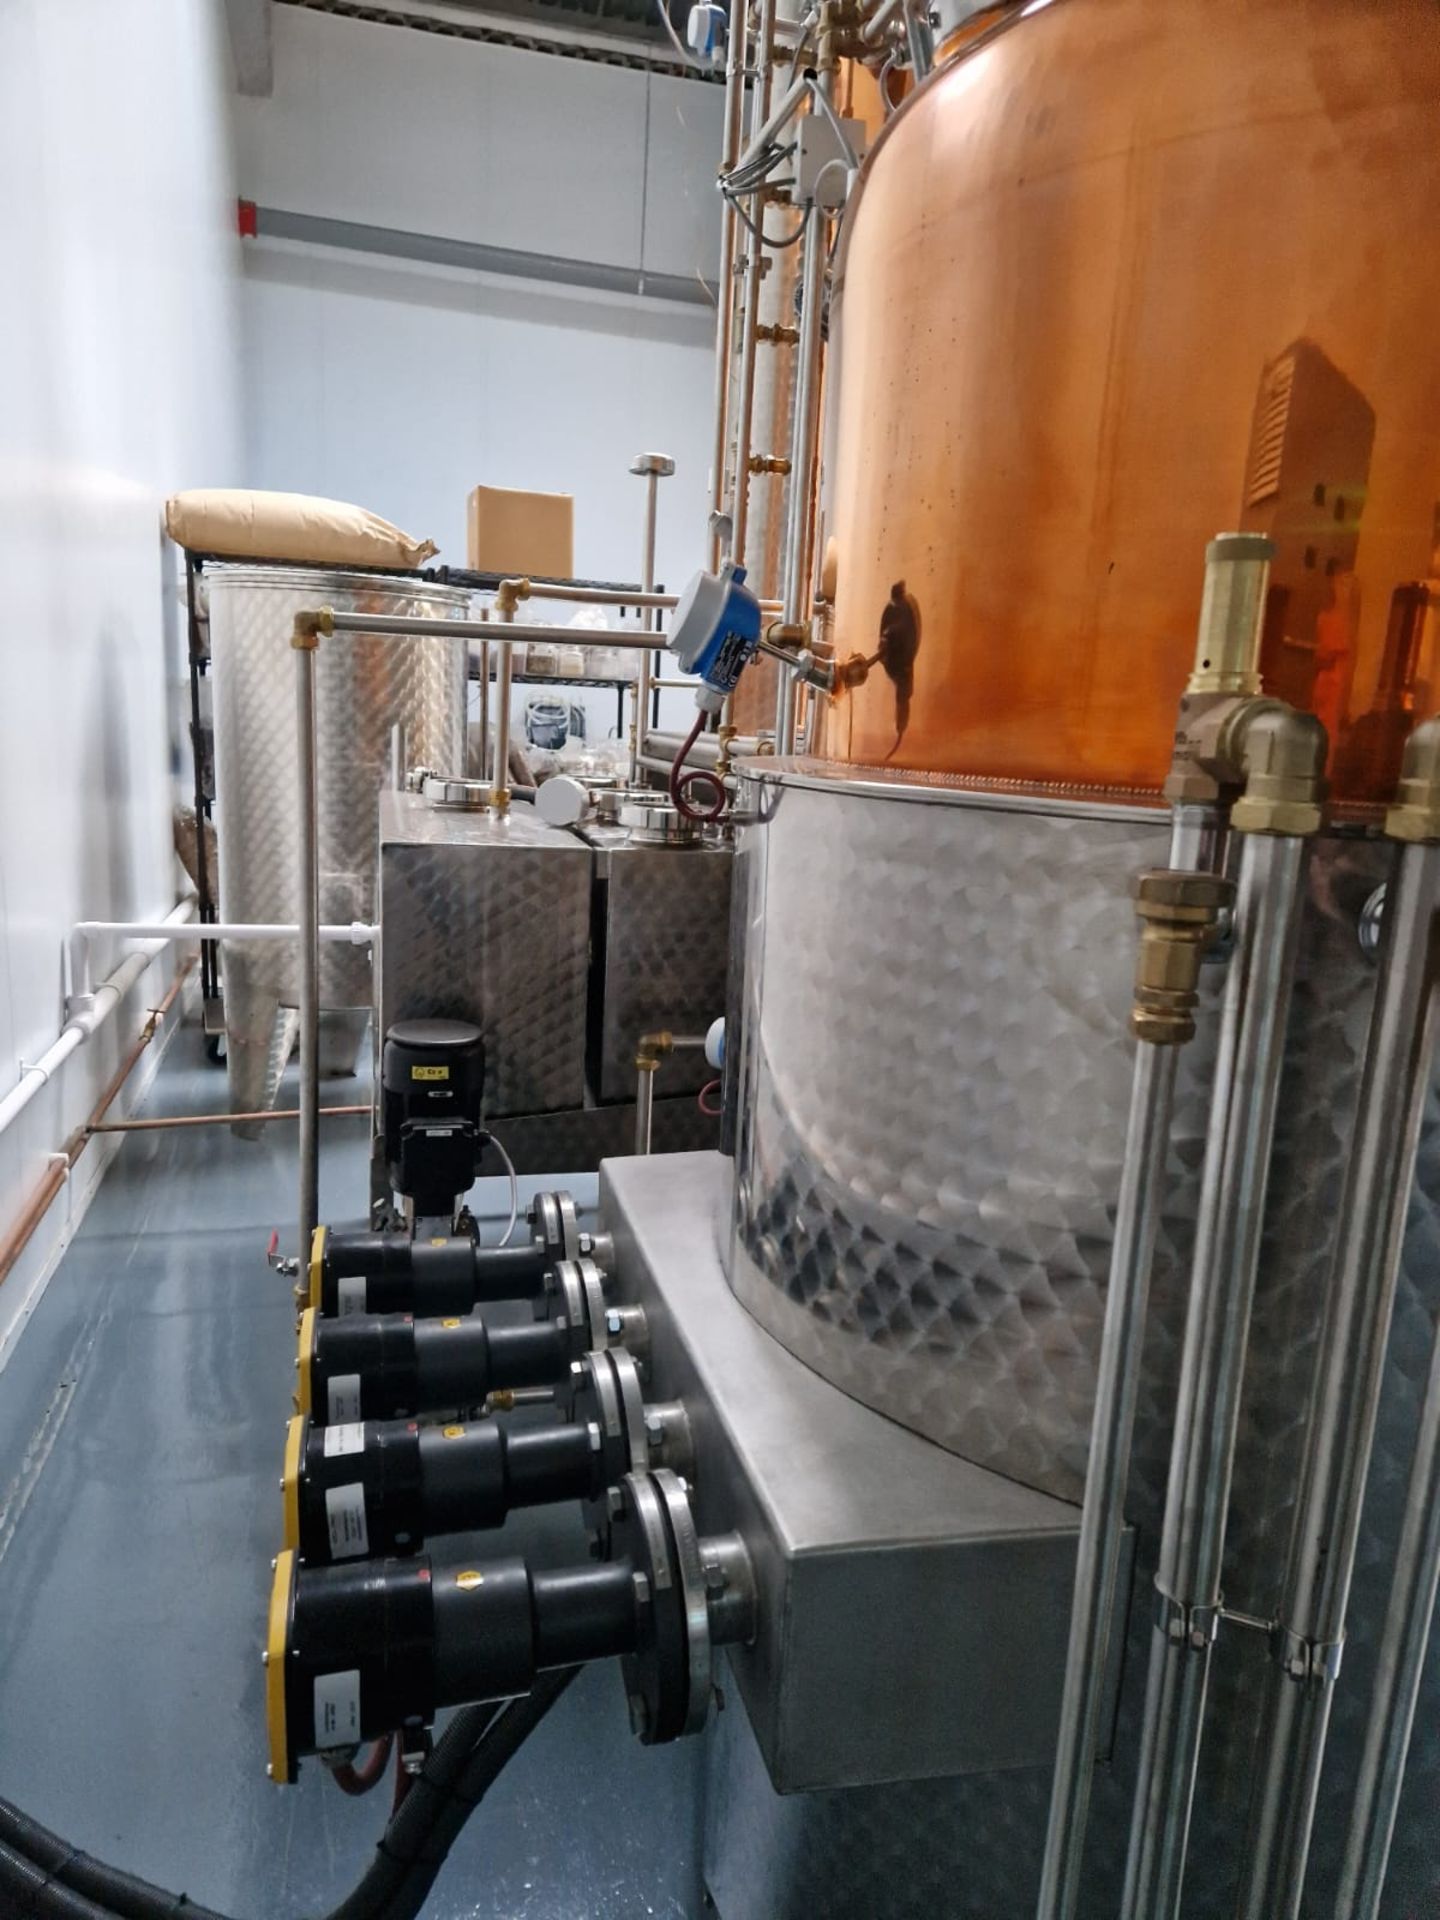 Arnold Holstein SH1000, 450L Pot Still. Installed and commissioned March 2022 - Image 4 of 9